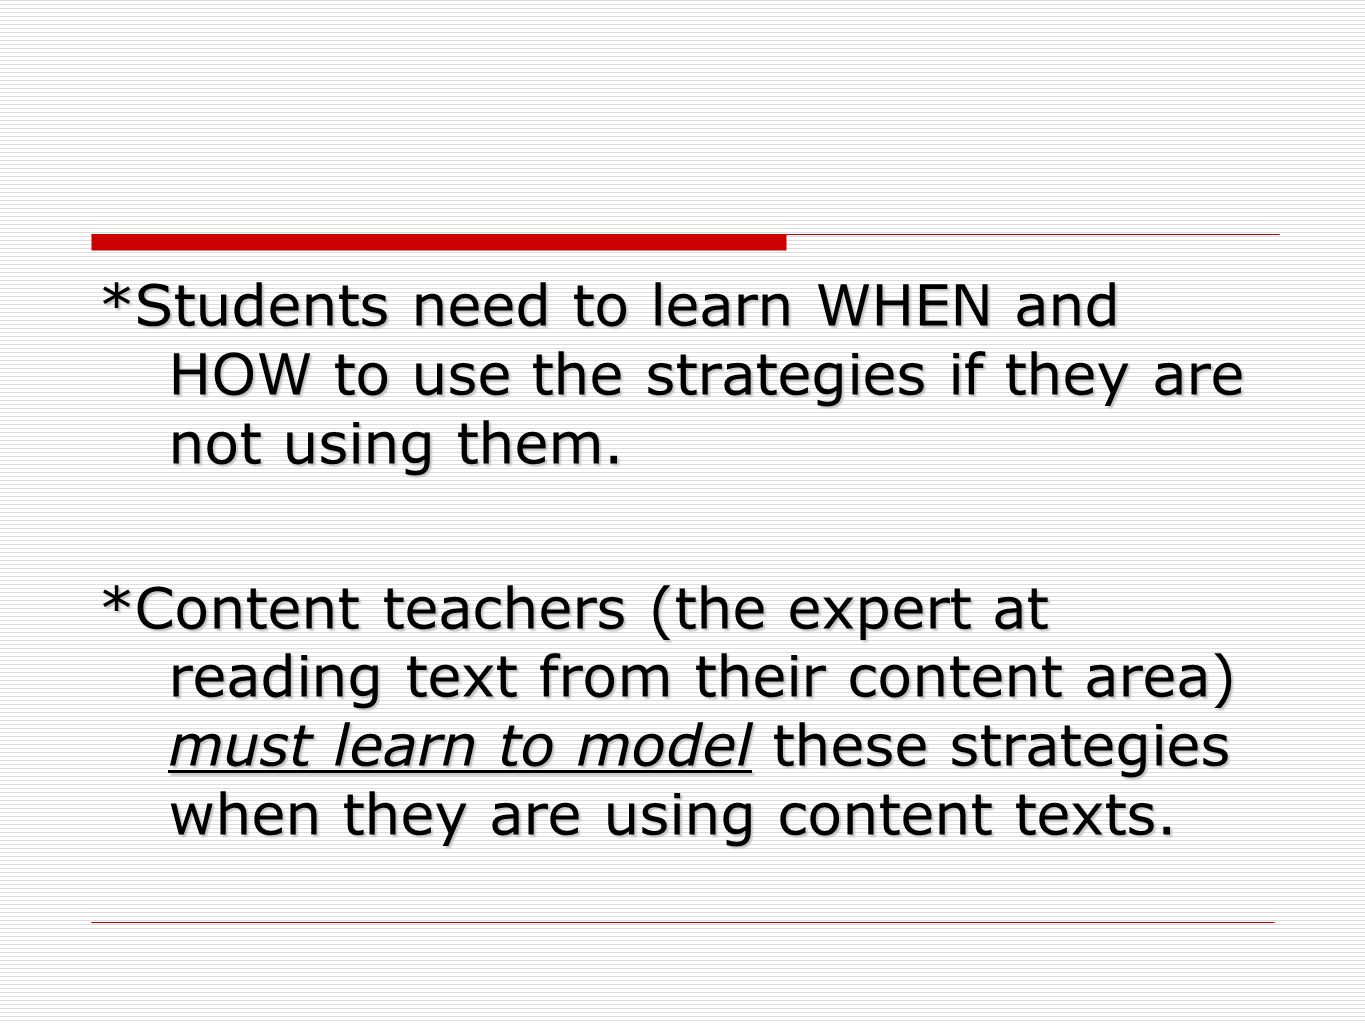 *Students need to learn WHEN and HOW to use the strategies if they are not using them.